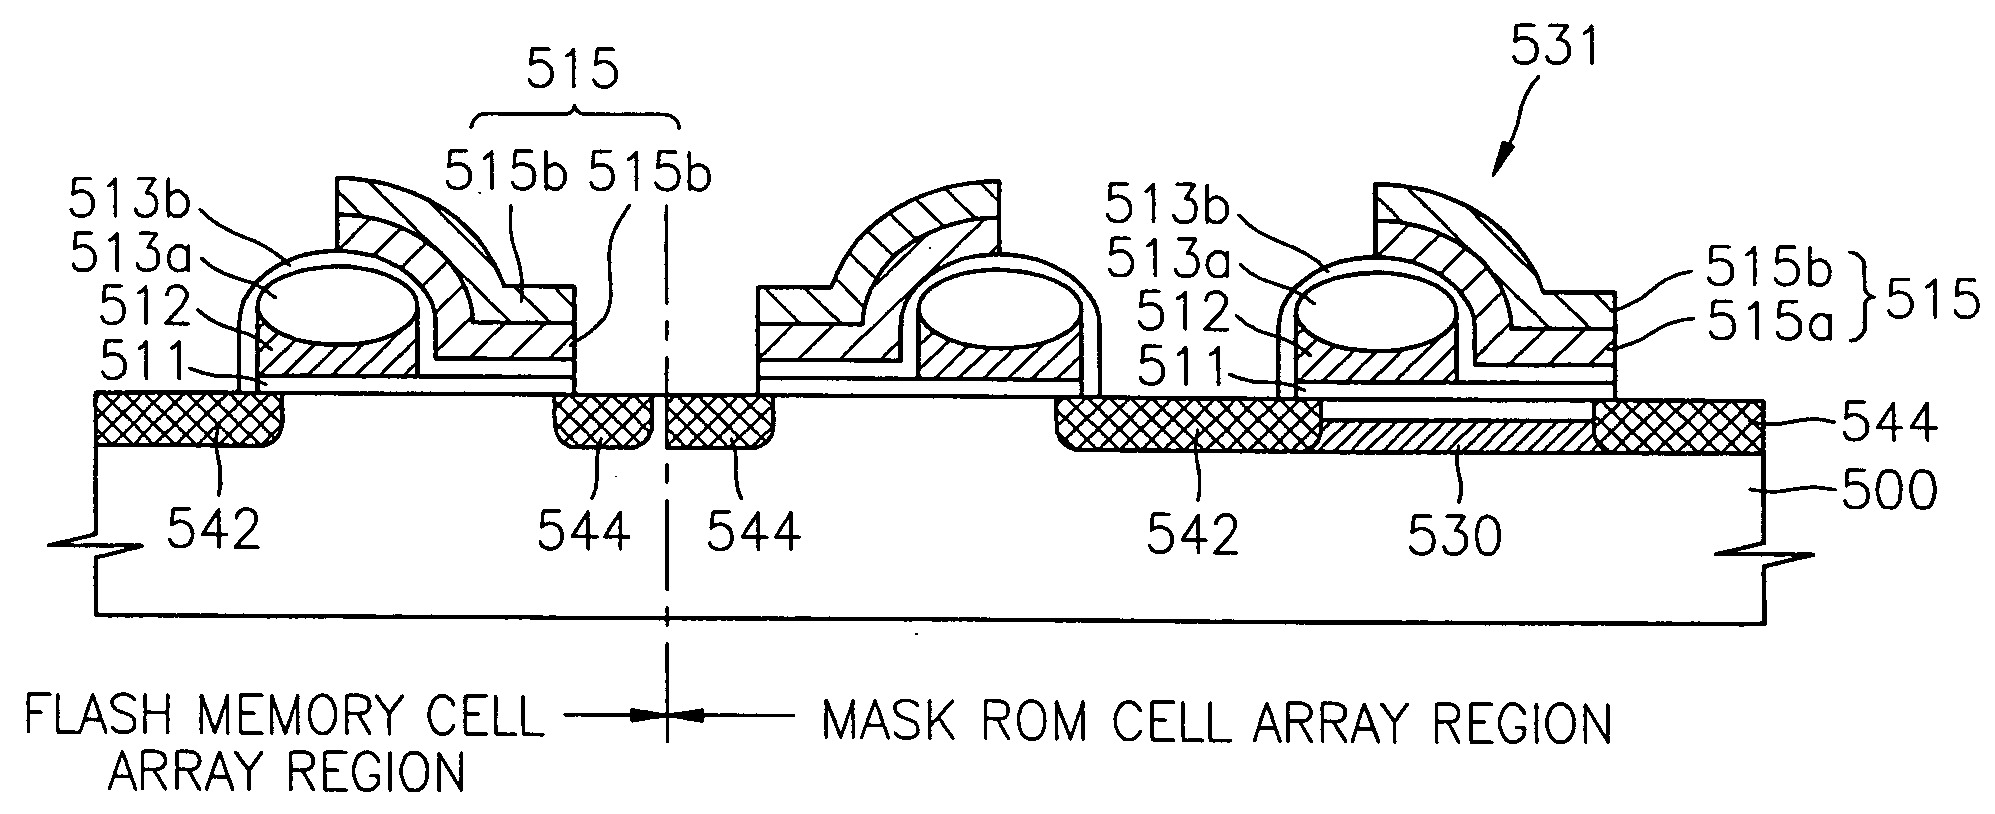 Semiconductor memory device including a flash memory cell array and a mask read-only memory cell array